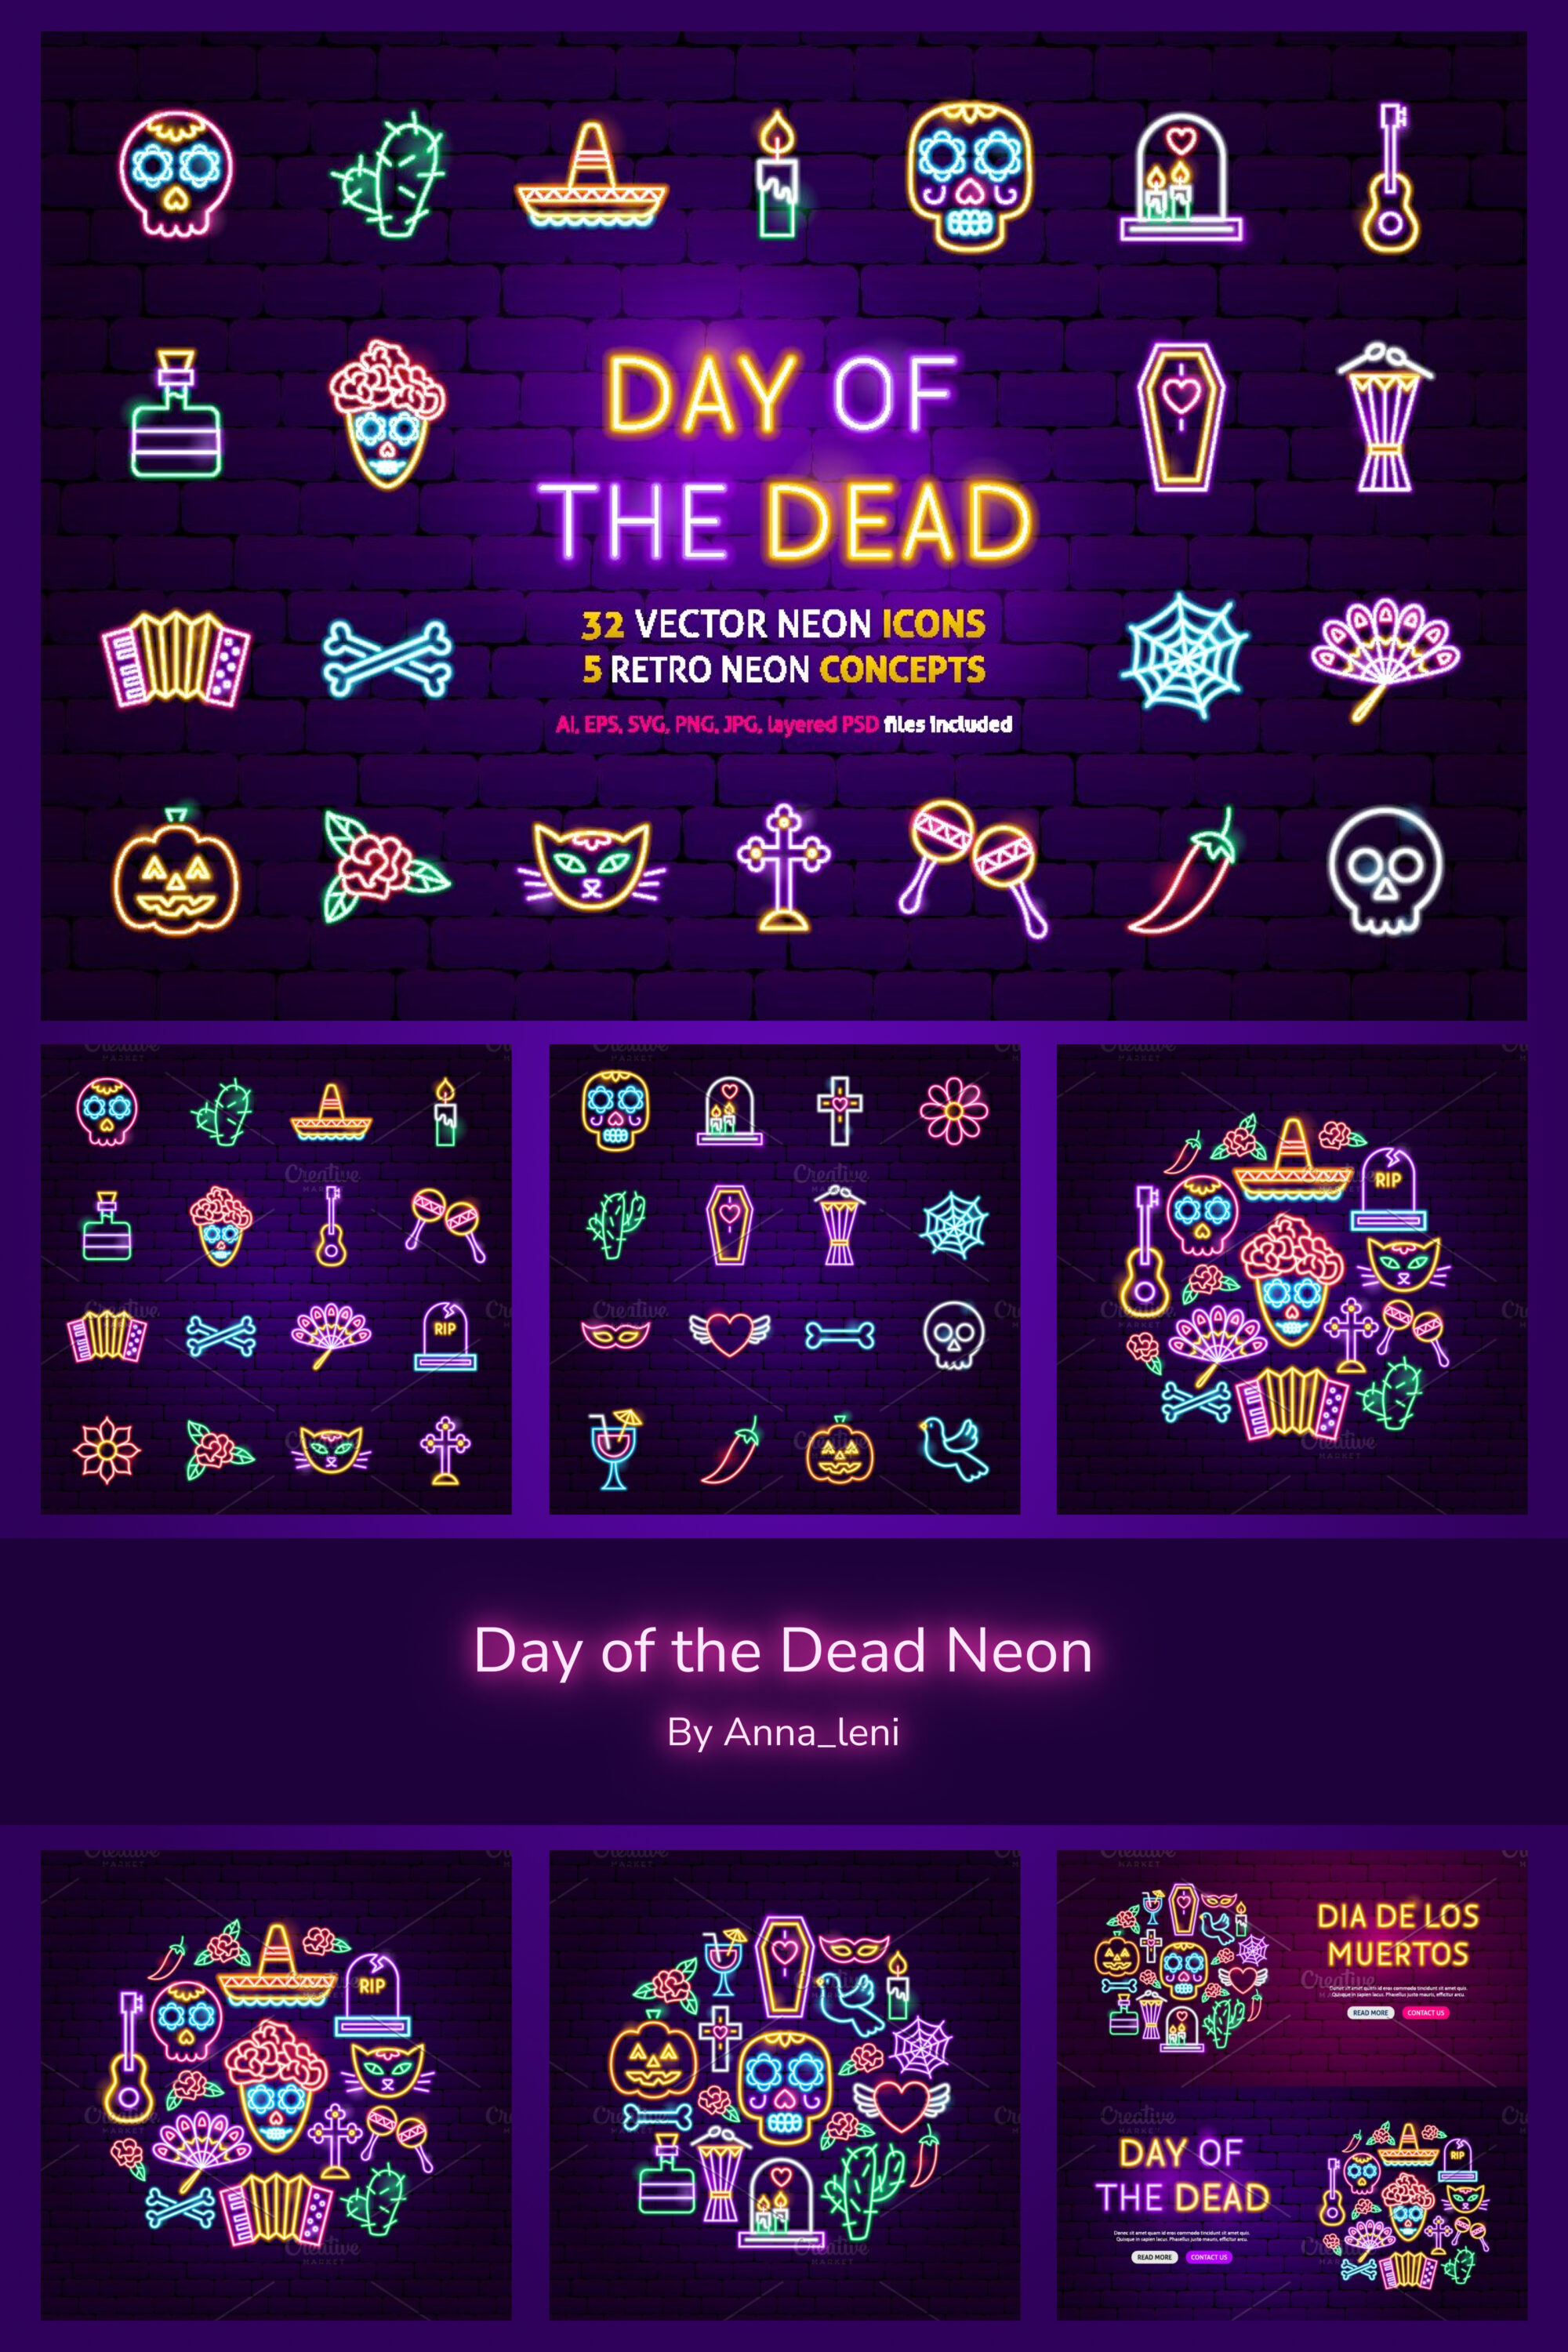 Day of the dead neon of pinterest.